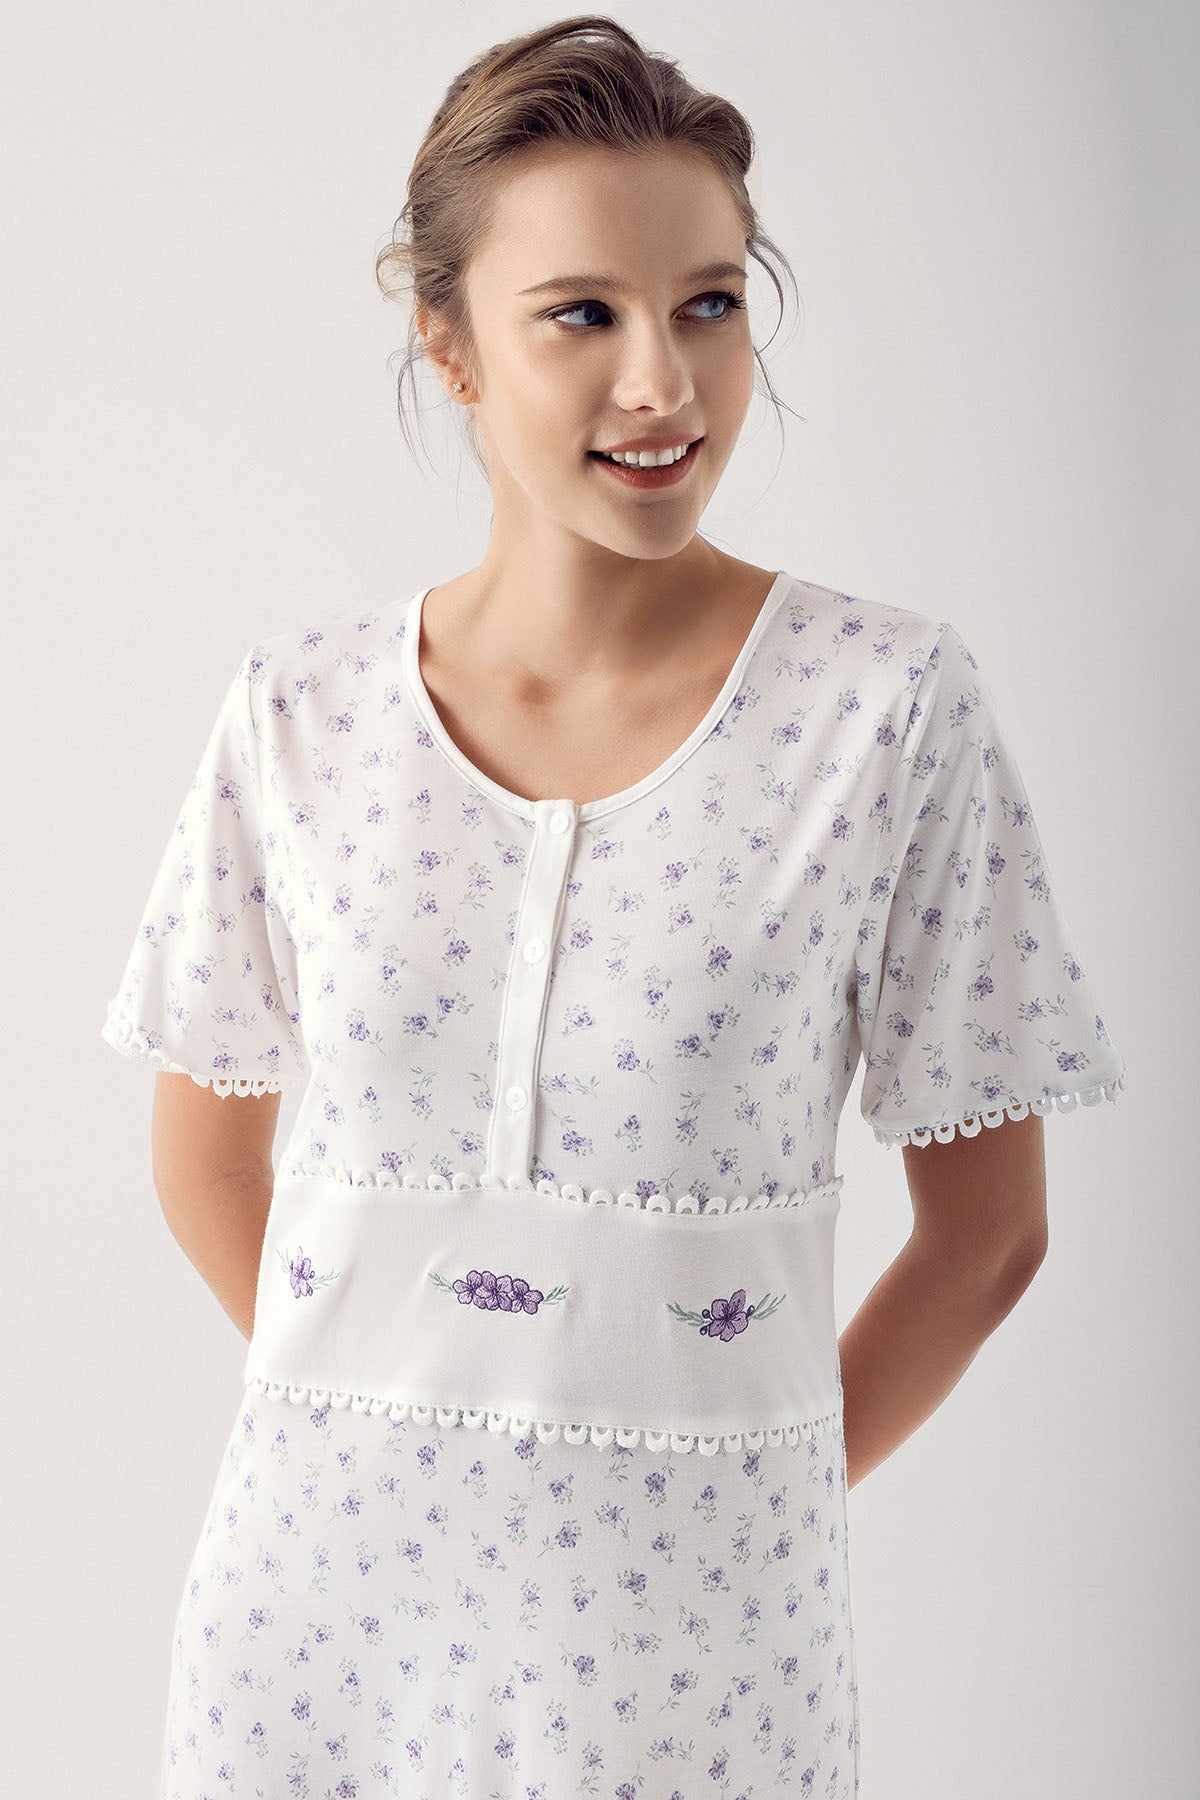 Flower Patterned Plus Size Maternity & Nursing Nightgown Lilac - 14112